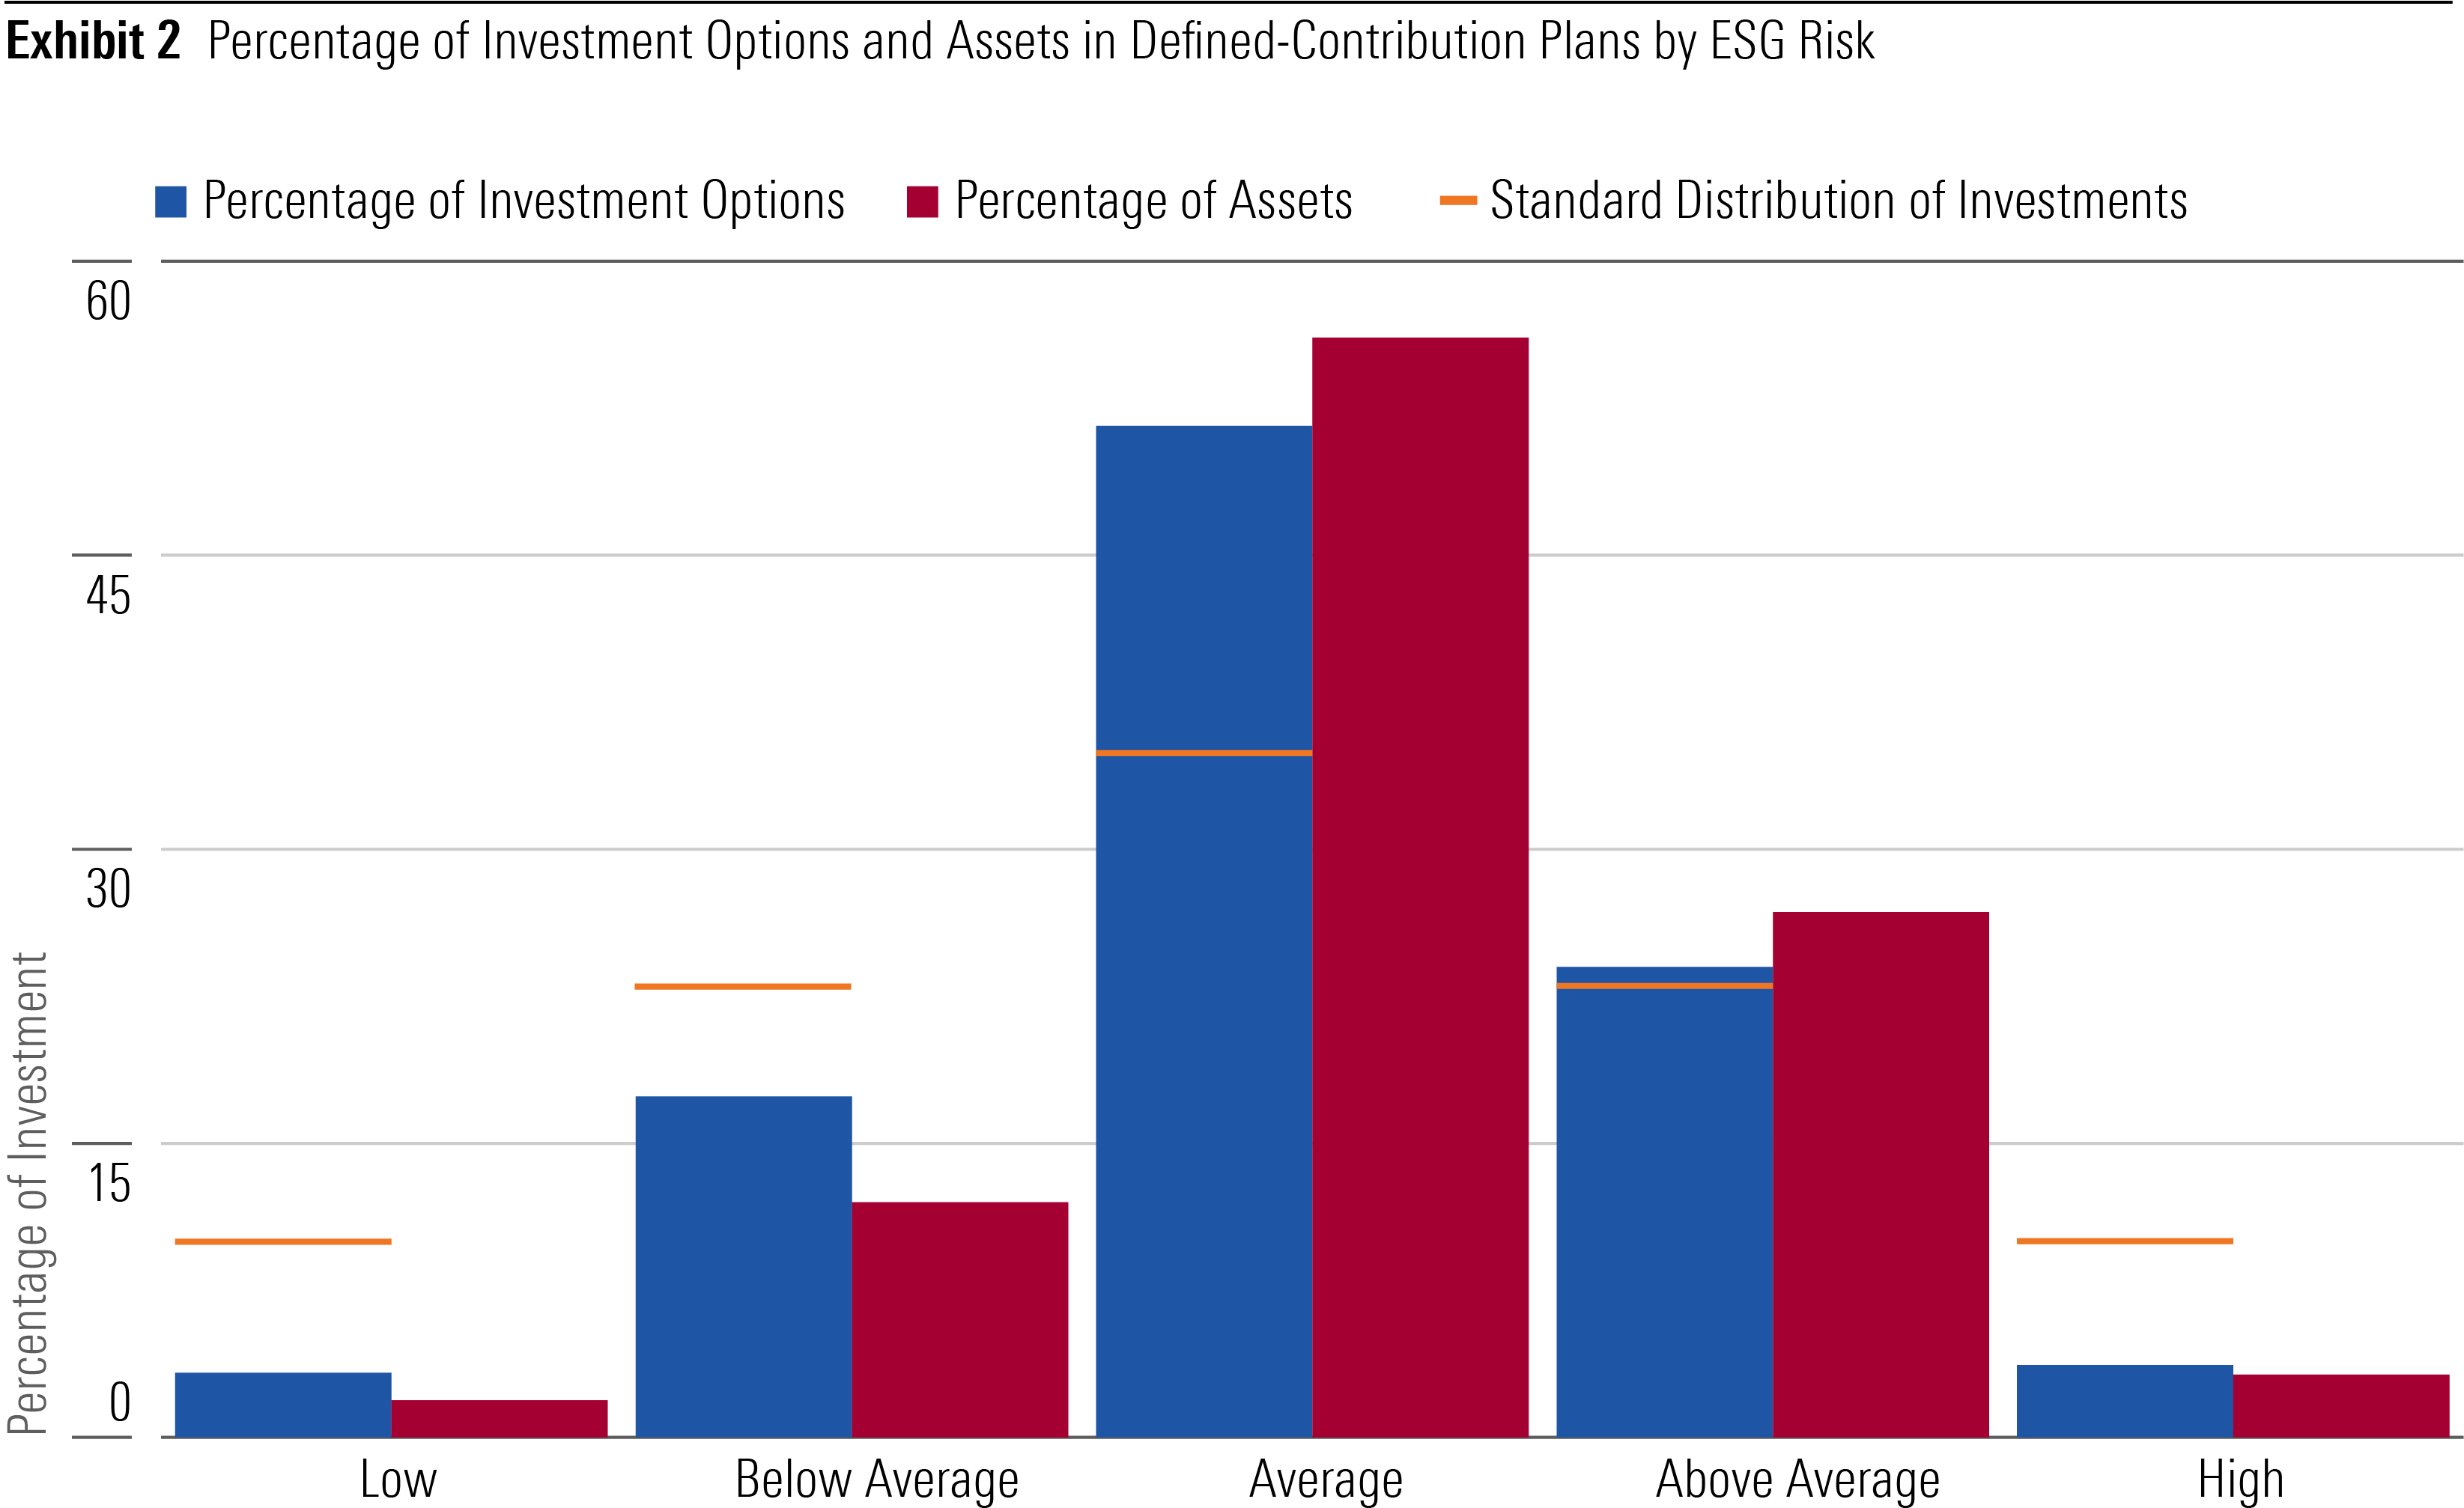 Bar chart showing the distribution of investment options and assets in defined-contribution plans by ESG Risk